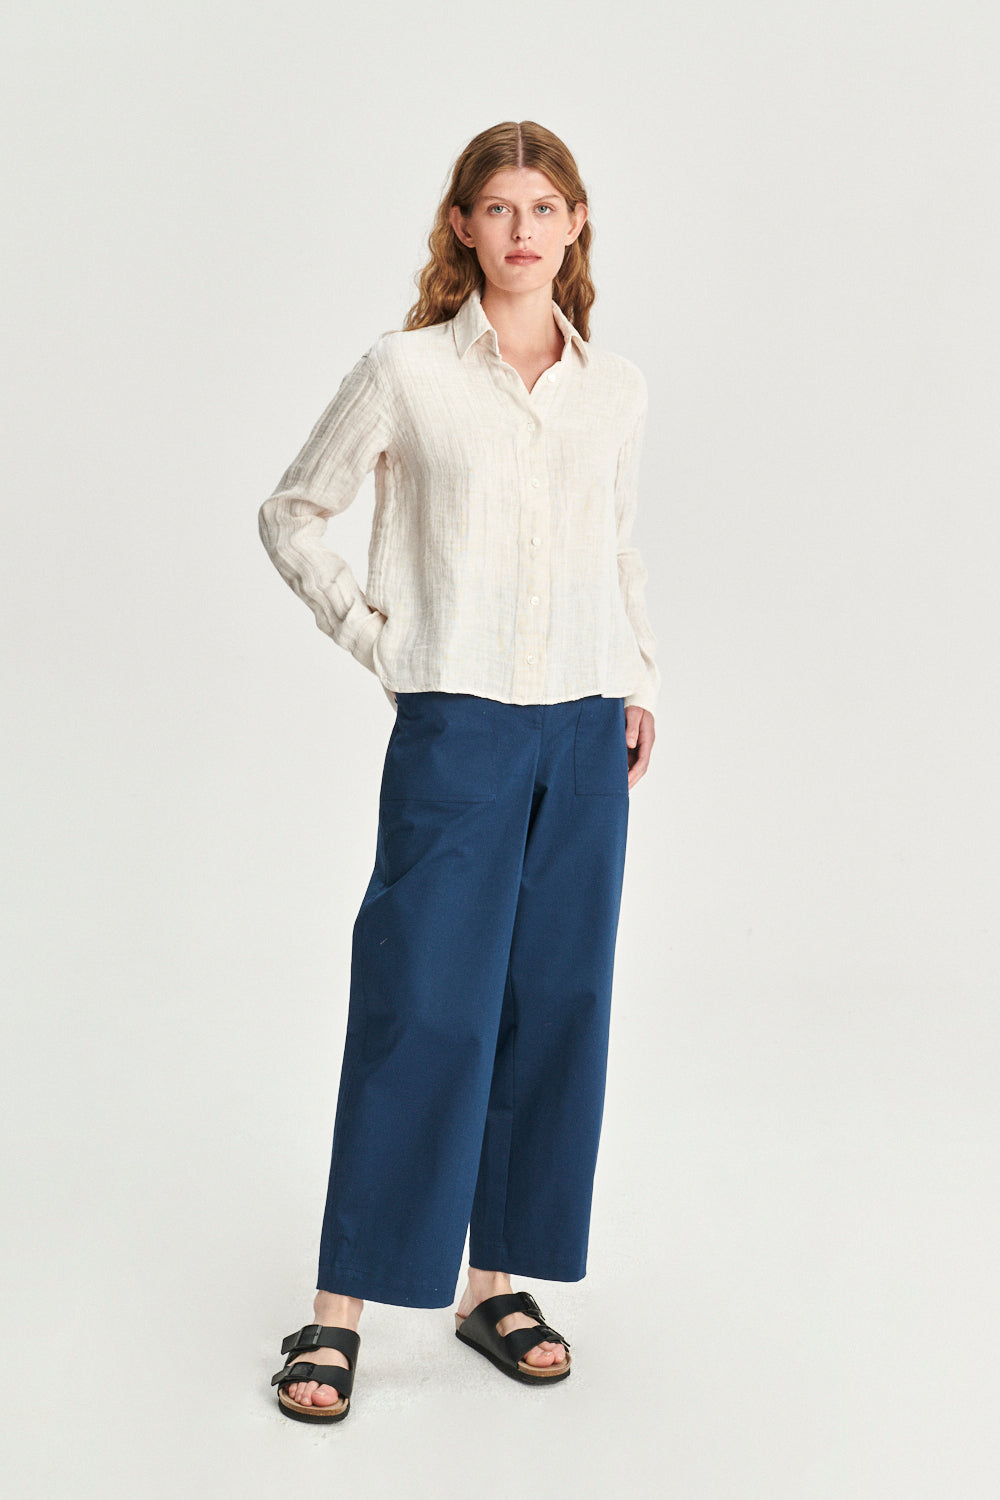 Relaxed Blouse in a Double Sided Off-White Fatigue Italian Linen and Cotton